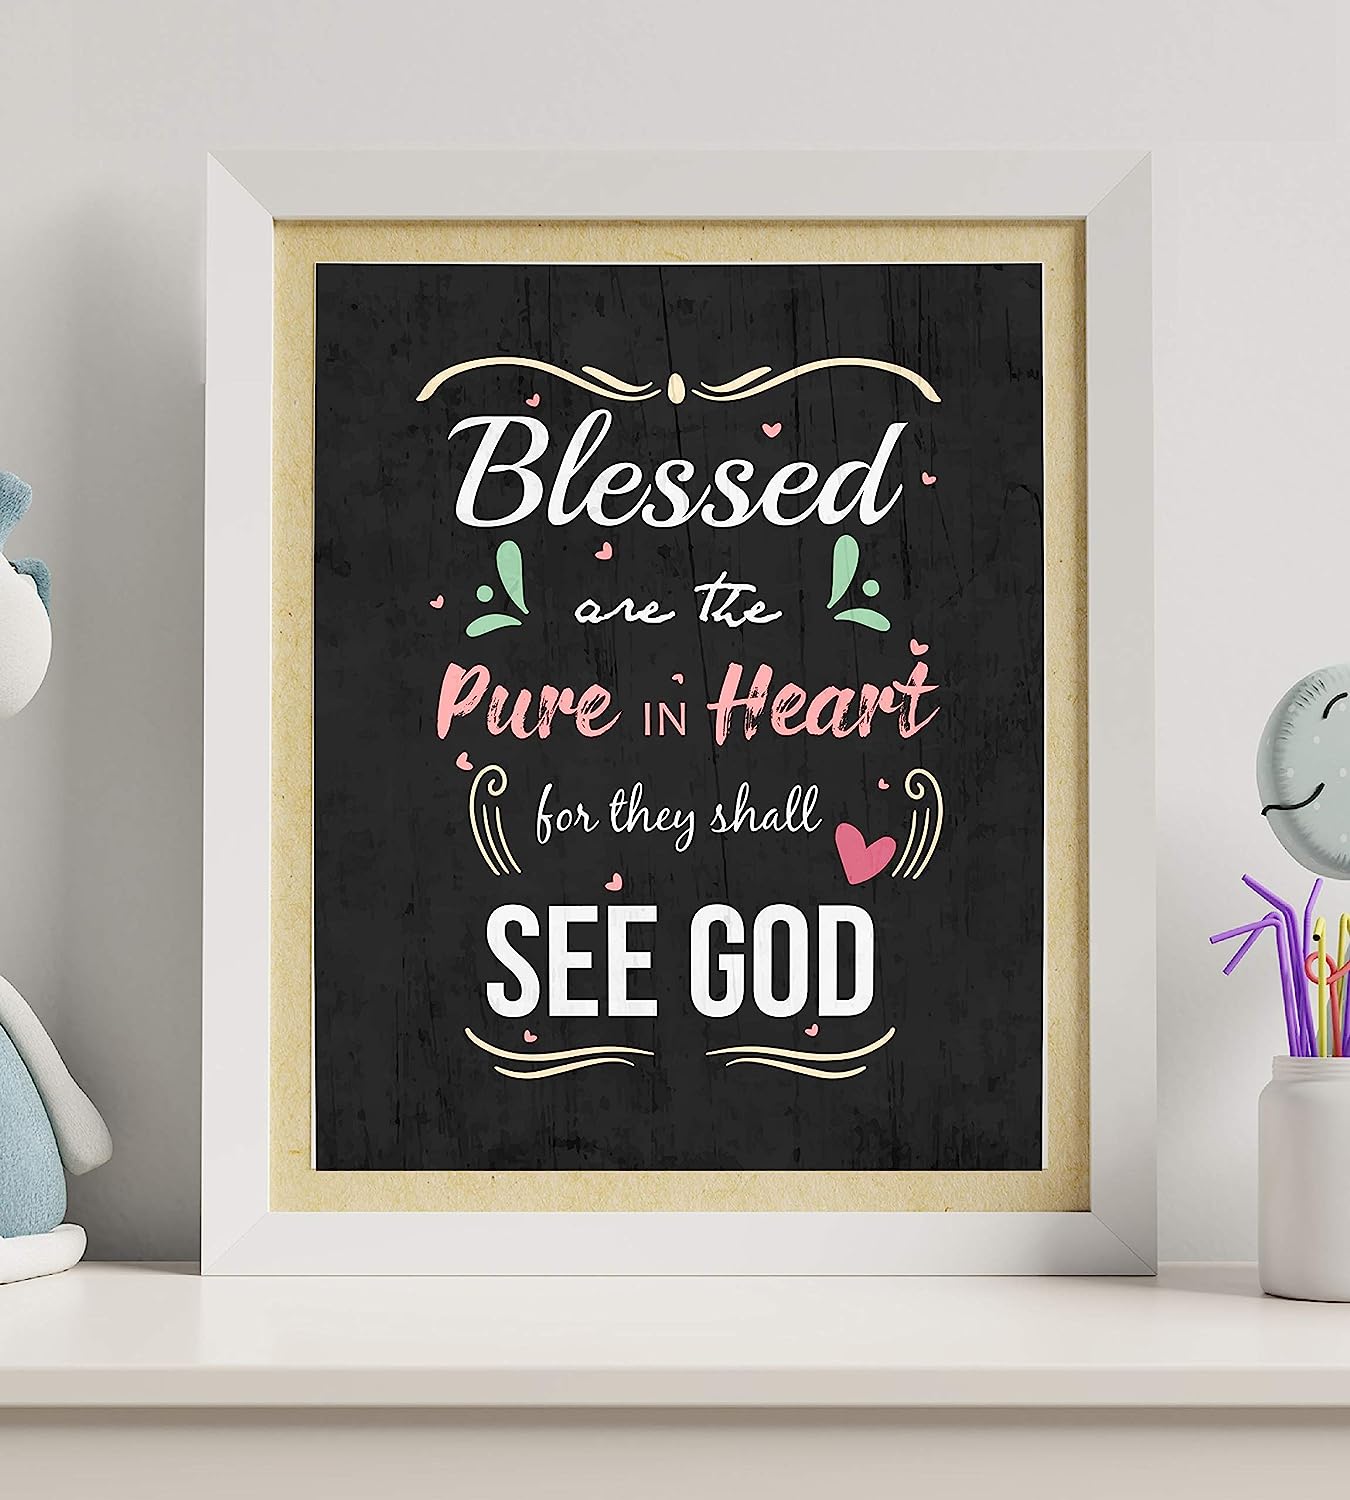 ?Blessed Are the Pure in Heart" Bible Verse Wall Art-8 x 10" Scripture Poster Print w/Distressed Wood Design-Ready to Frame. Inspirational Christian Decor for Home-Office-Church. Great Gift of Faith!